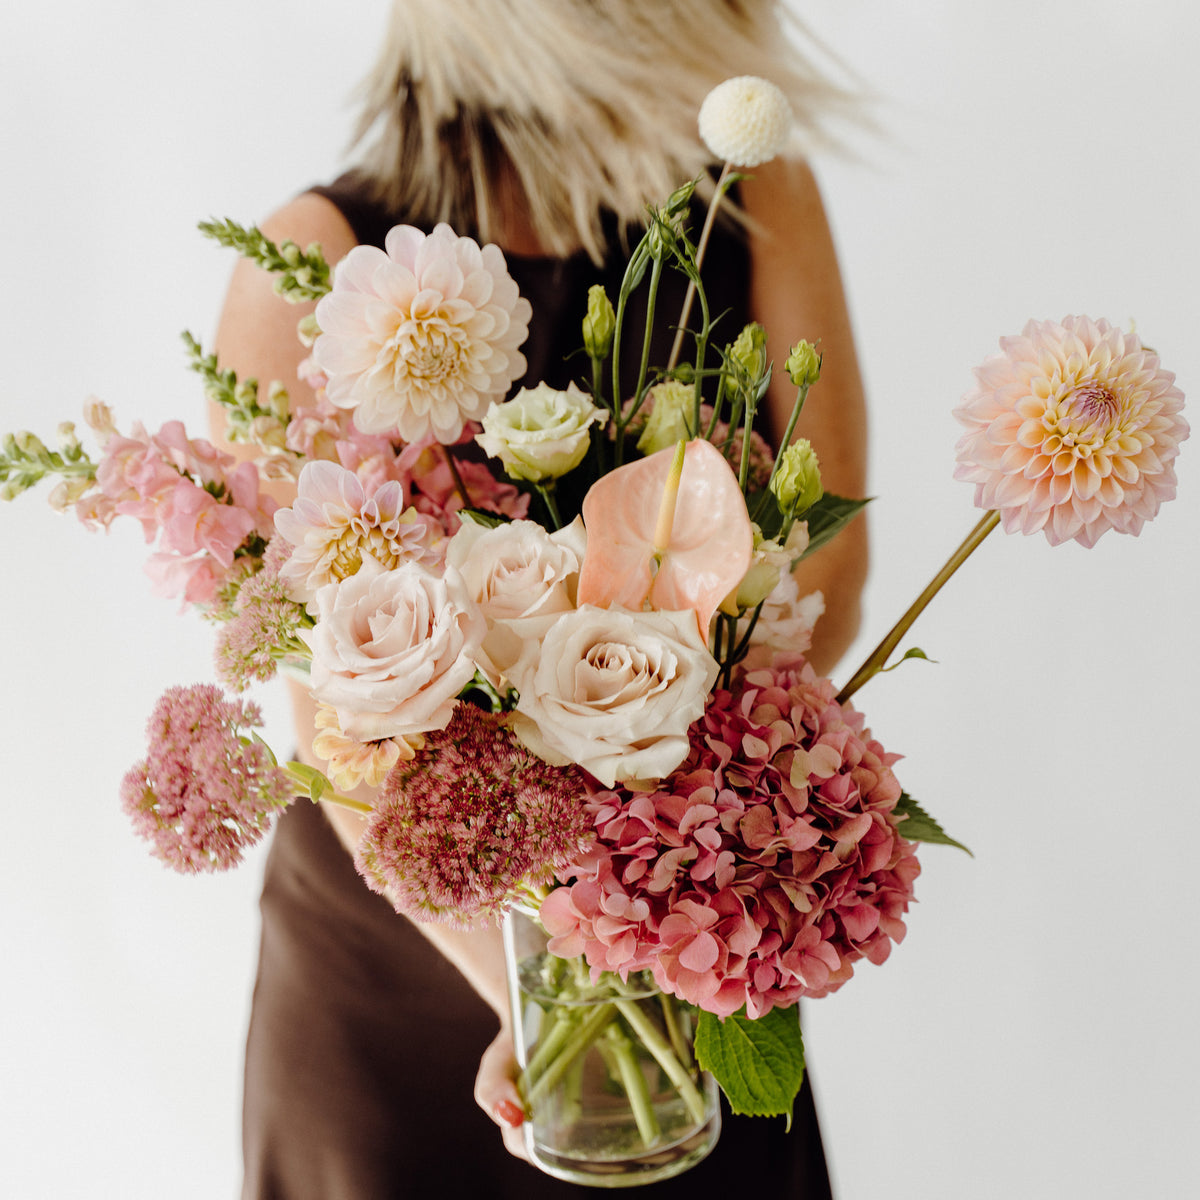 Luxe Floral Bouquet In Vase + Love Loco Chocolates